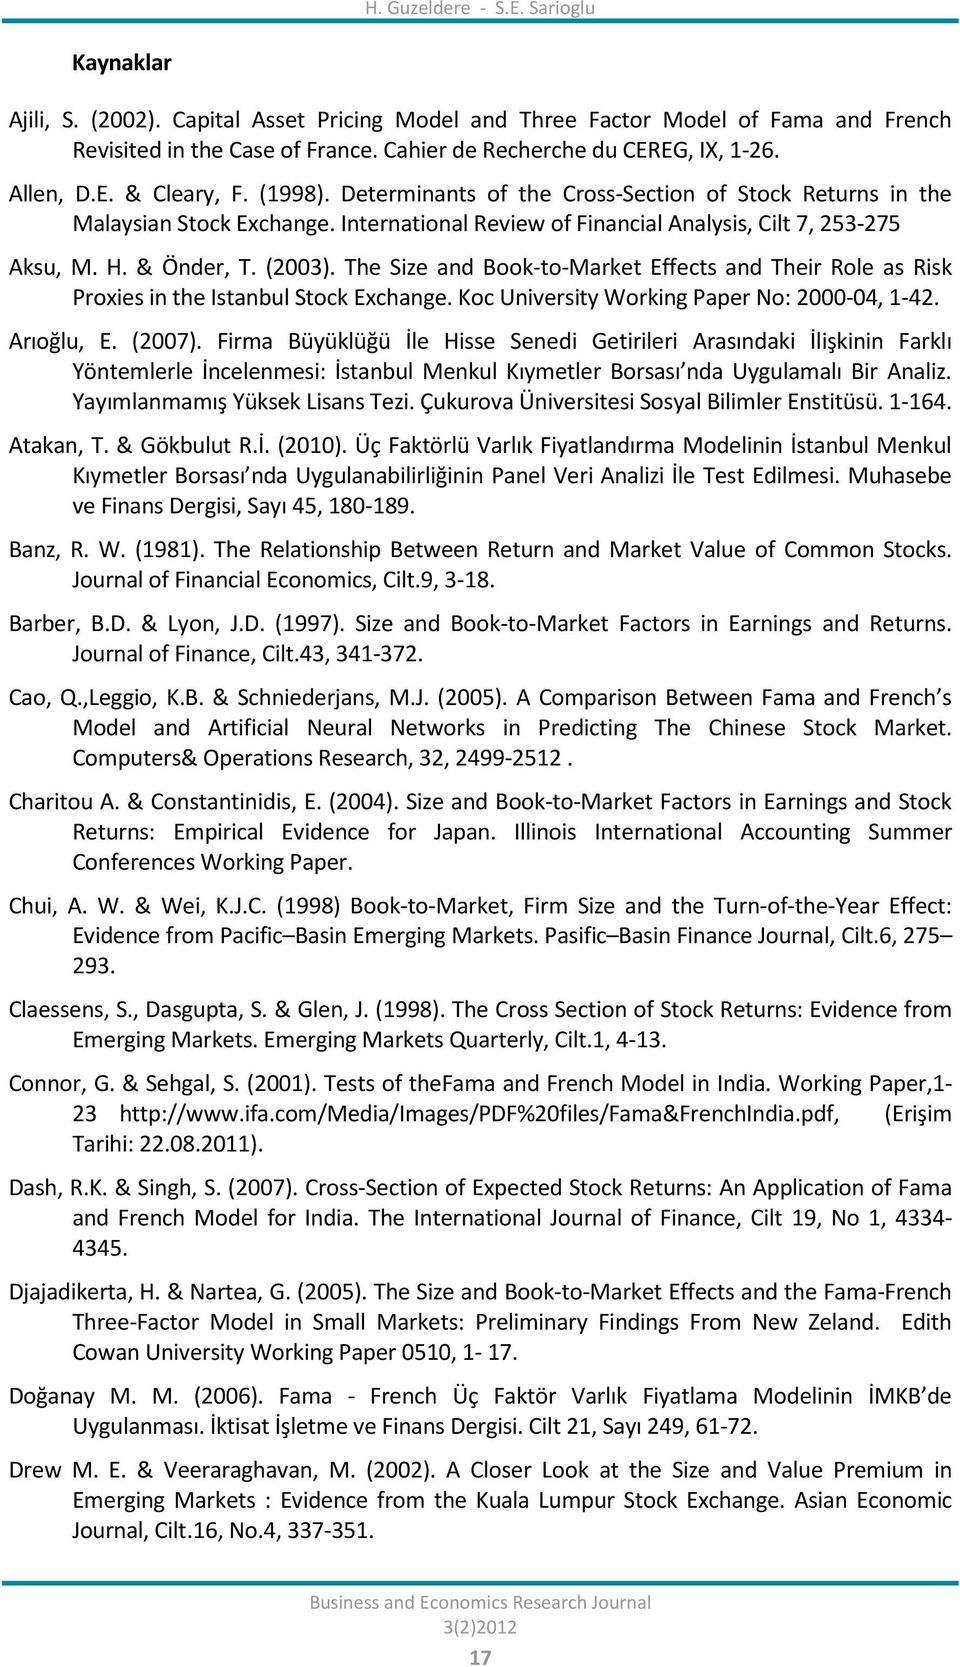 (2003). The Size and Book-to-Market Effects and Their Role as Risk Proxies in the Istanbul Stock Exchange. Koc University Working Paper No: 2000-04, 1-42. Arıoğlu, E. (2007).